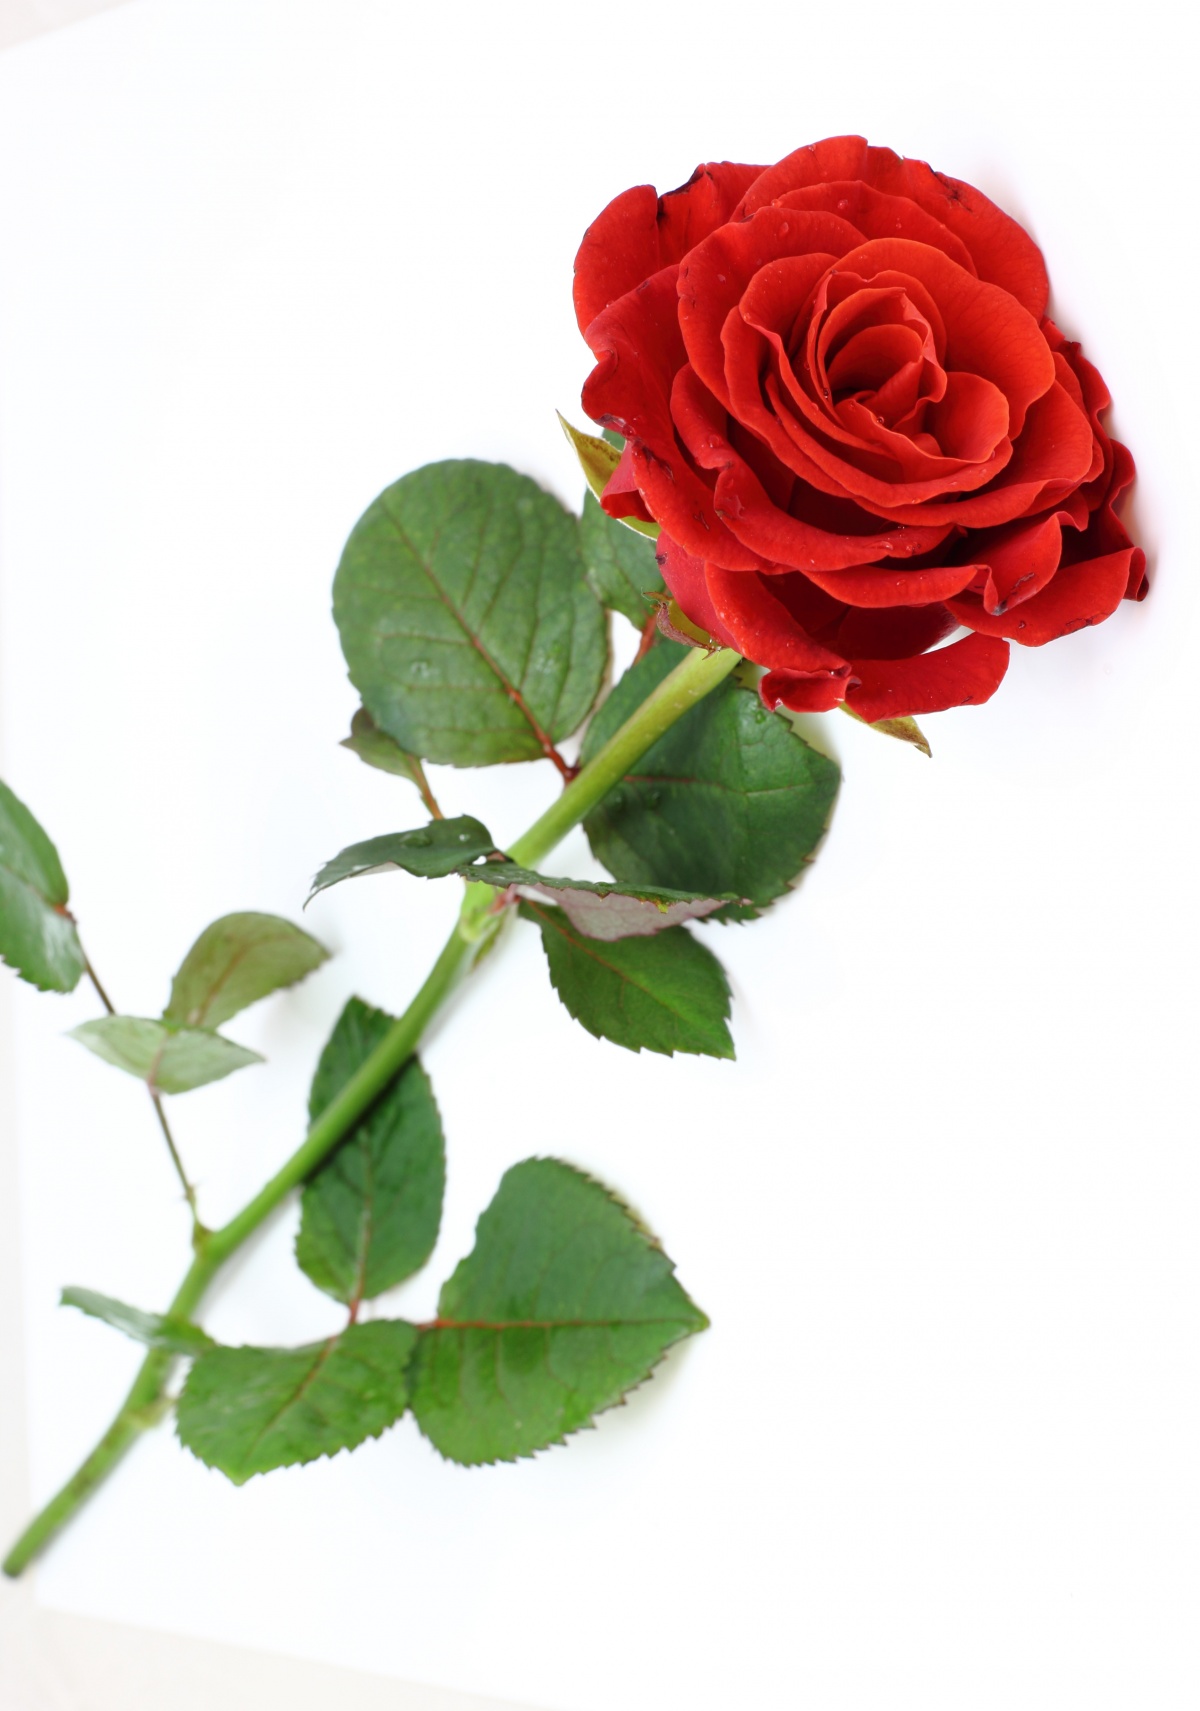 One Red Rose On A Stem - Happy New Year 2020 Quotes - HD Wallpaper 